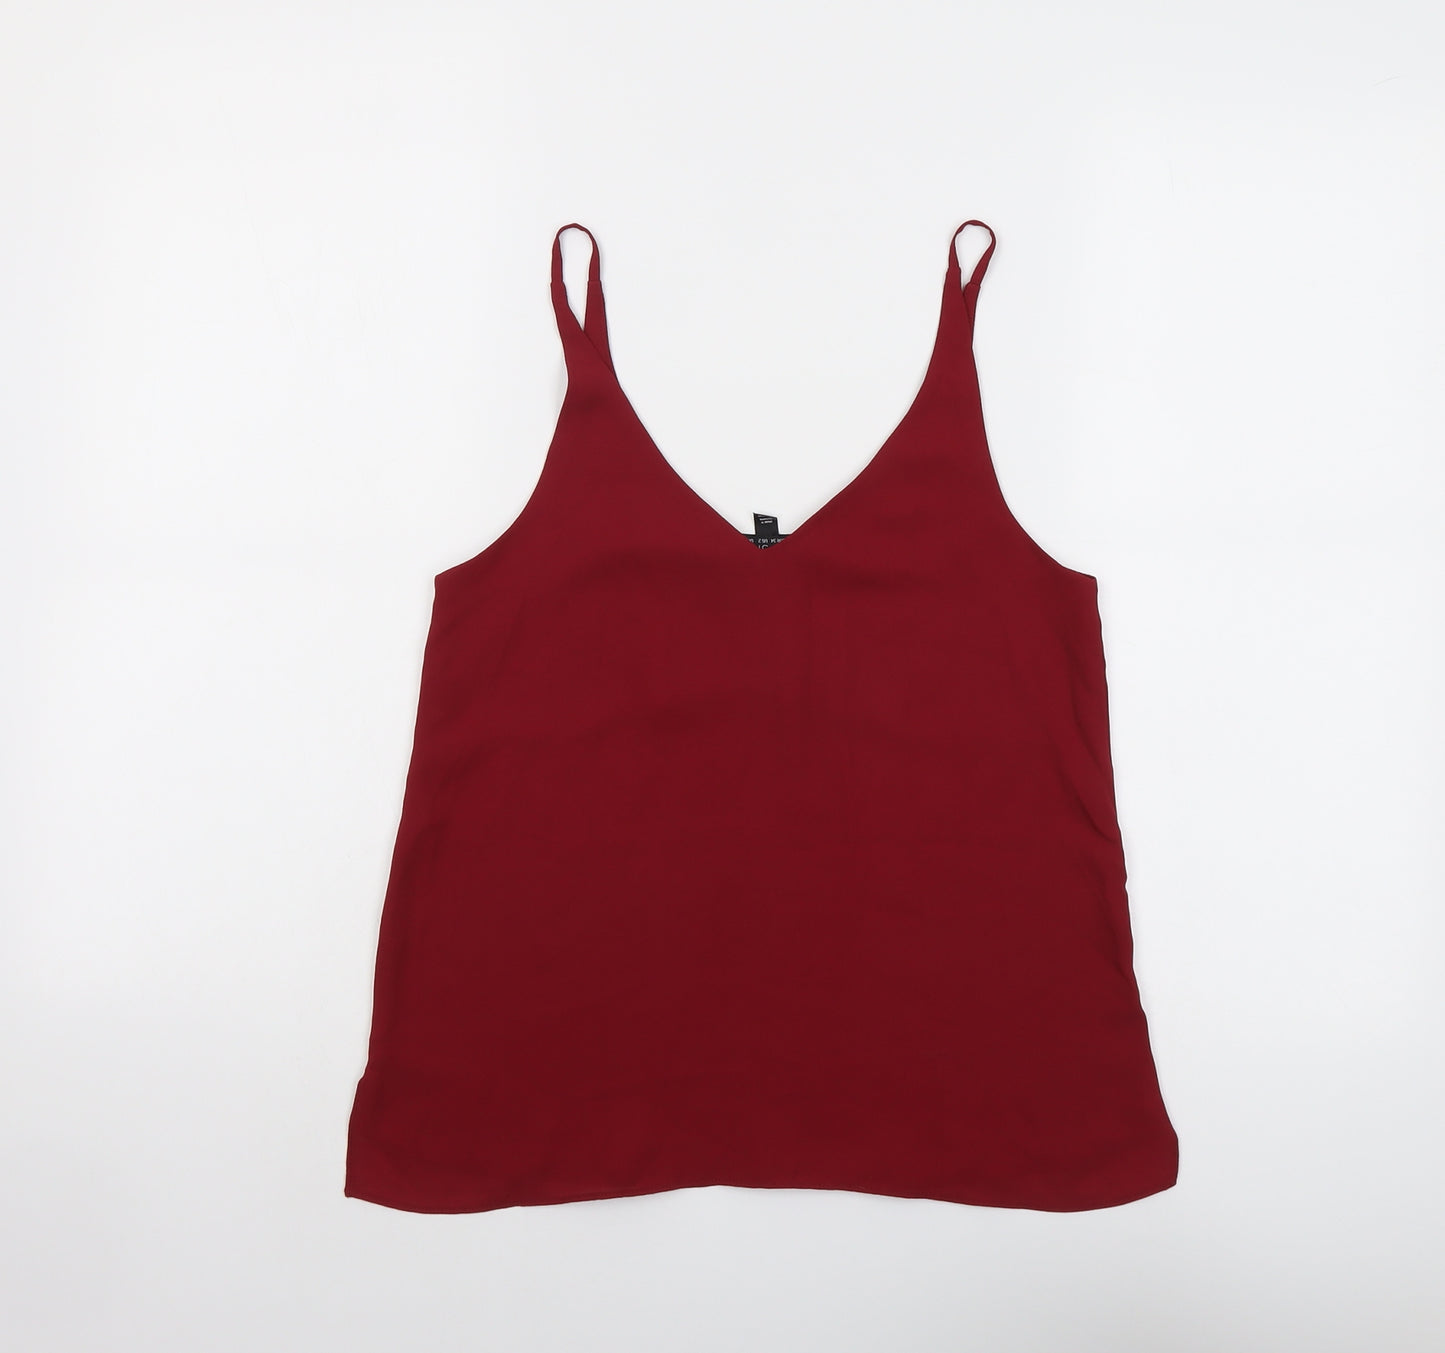 Topshop Womens Red Polyester Basic Tank Size 6 V-Neck